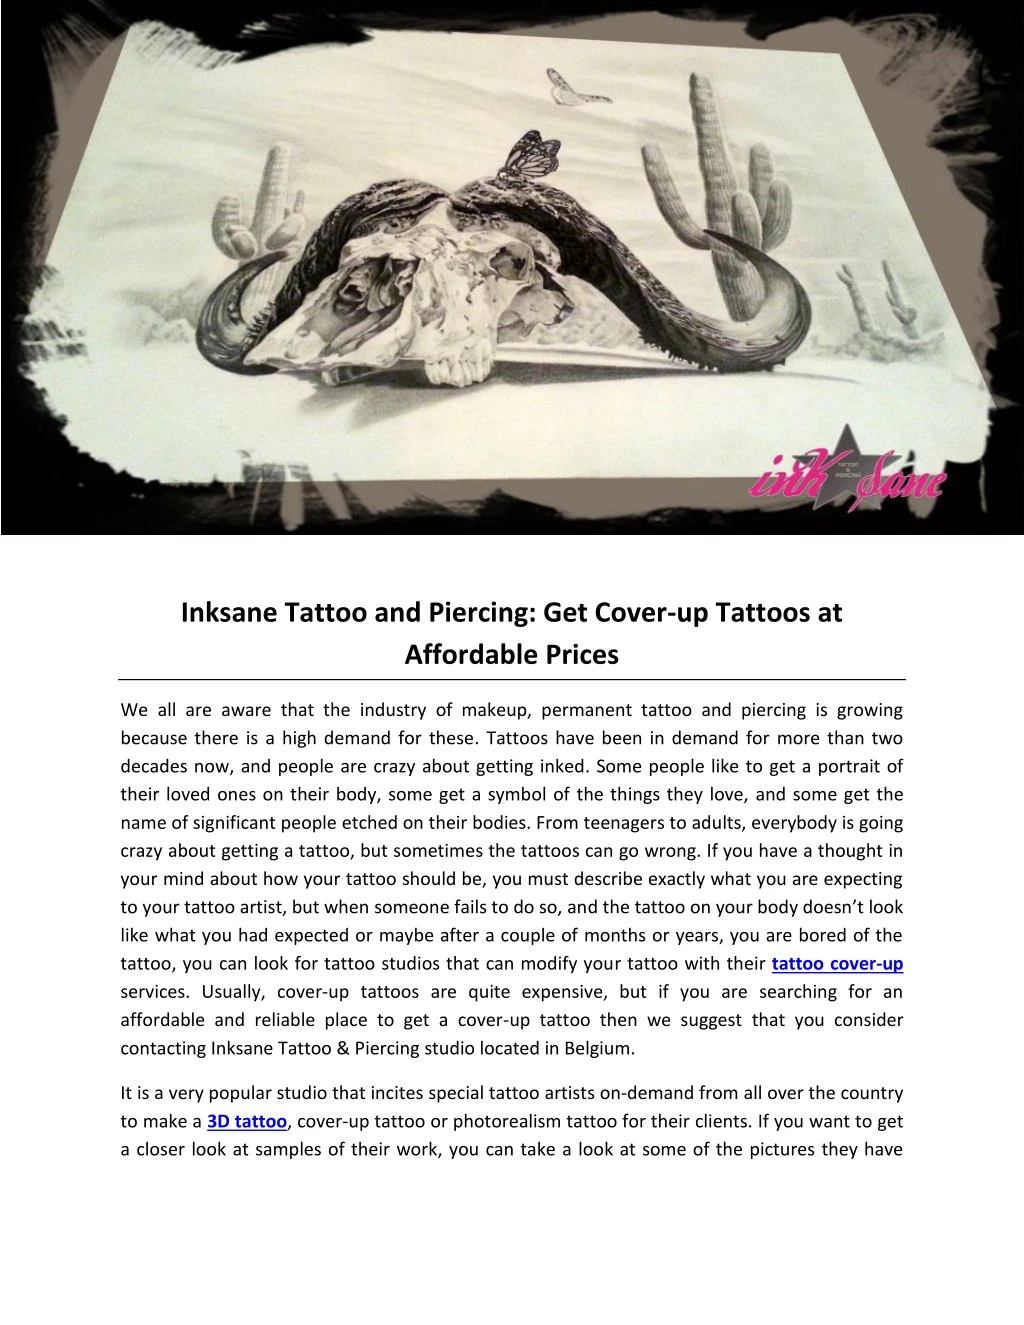 inksane tattoo and piercing get cover up tattoos